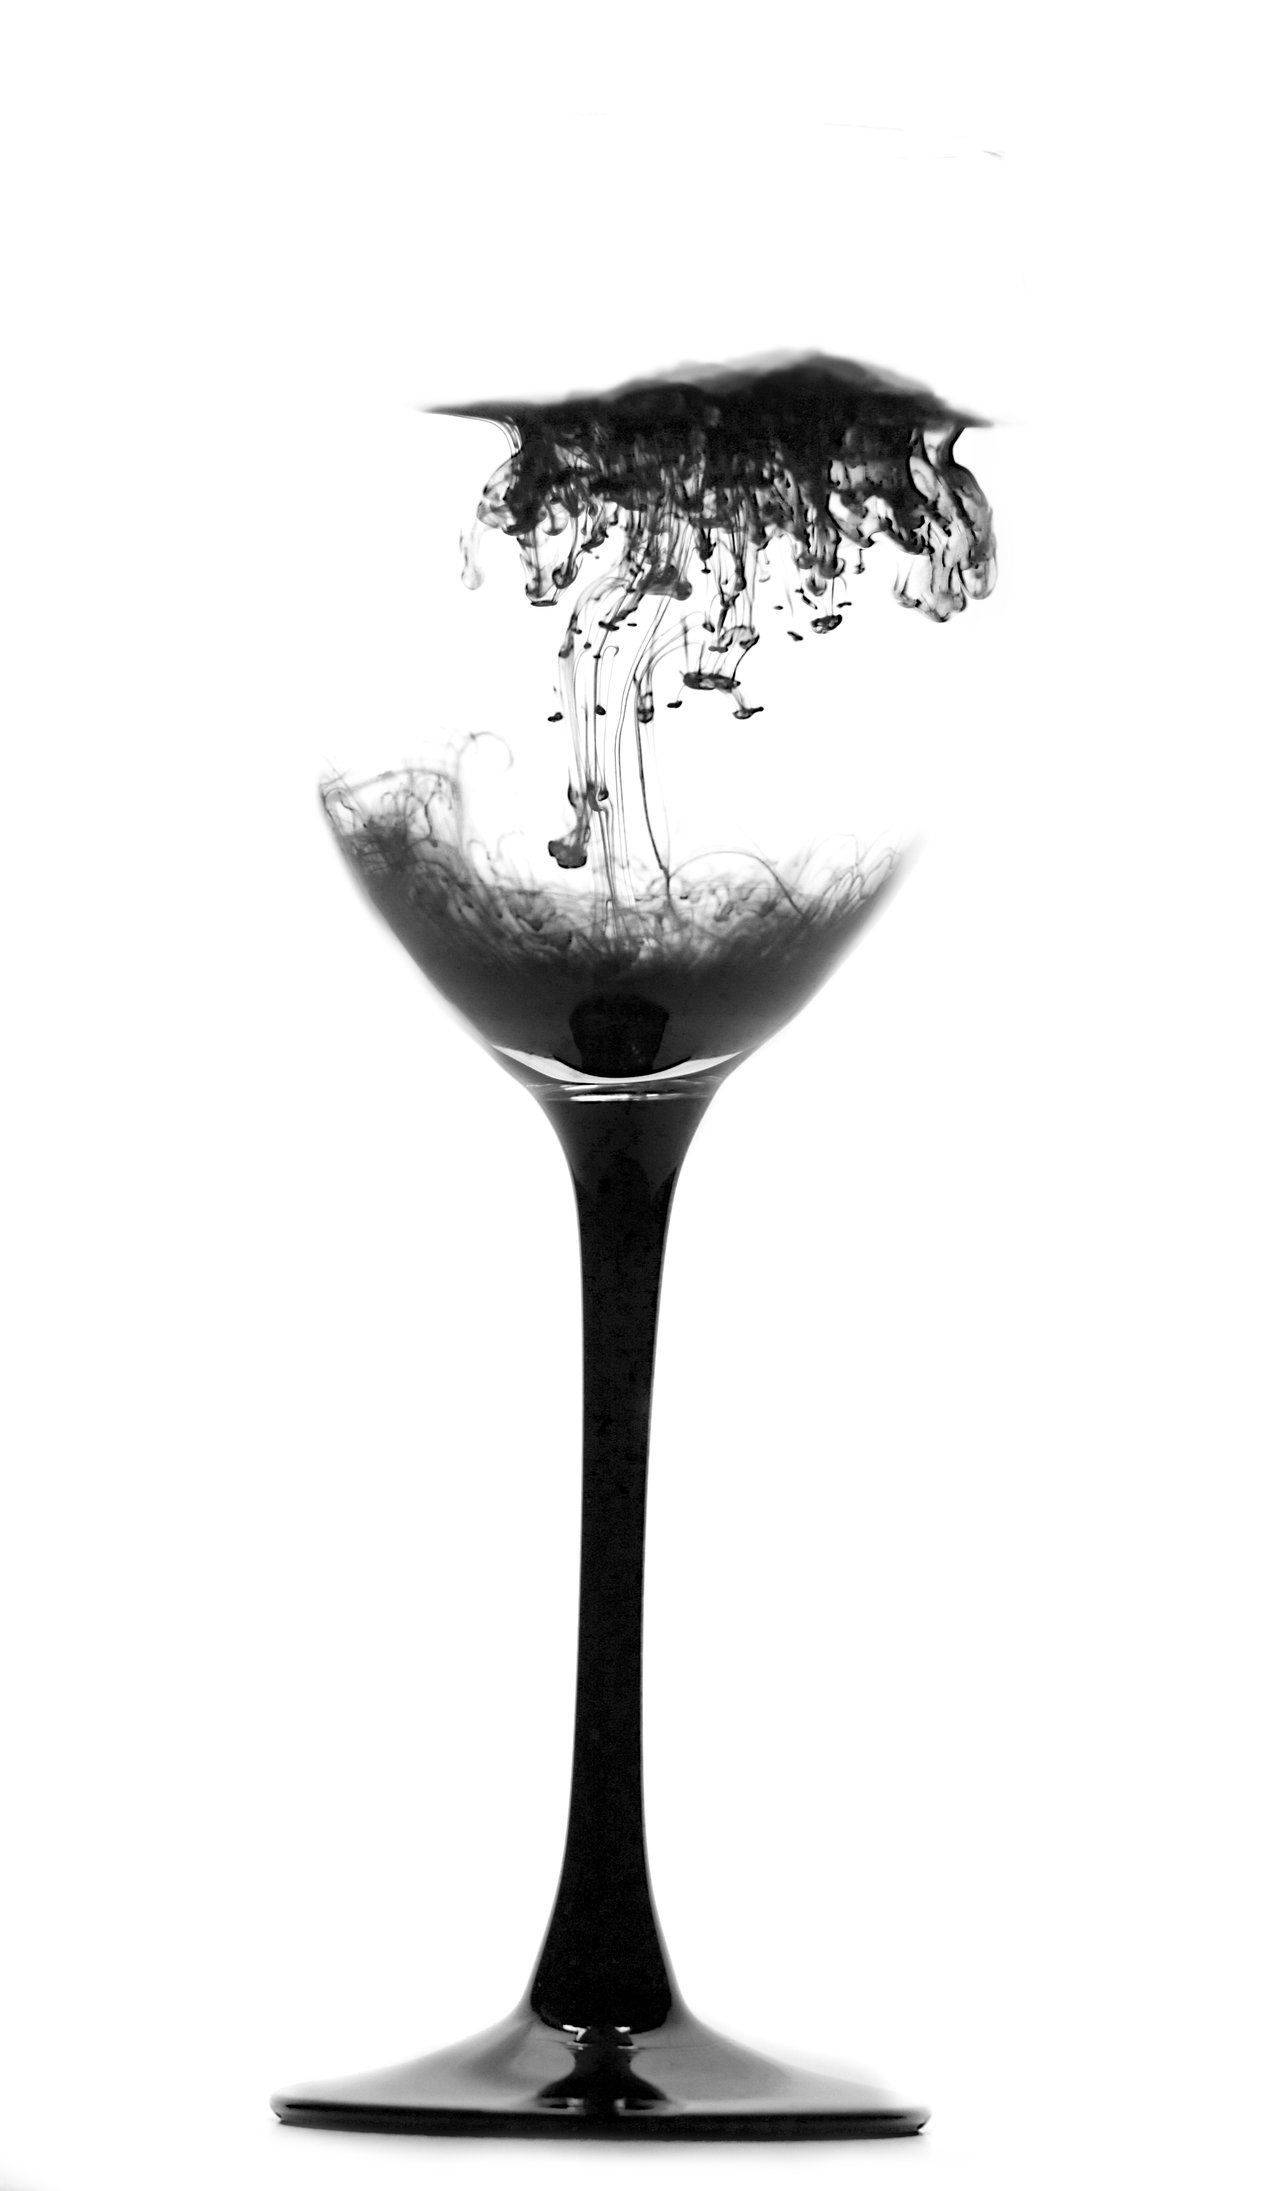 surreal wine glass with dripping cloudlike ink